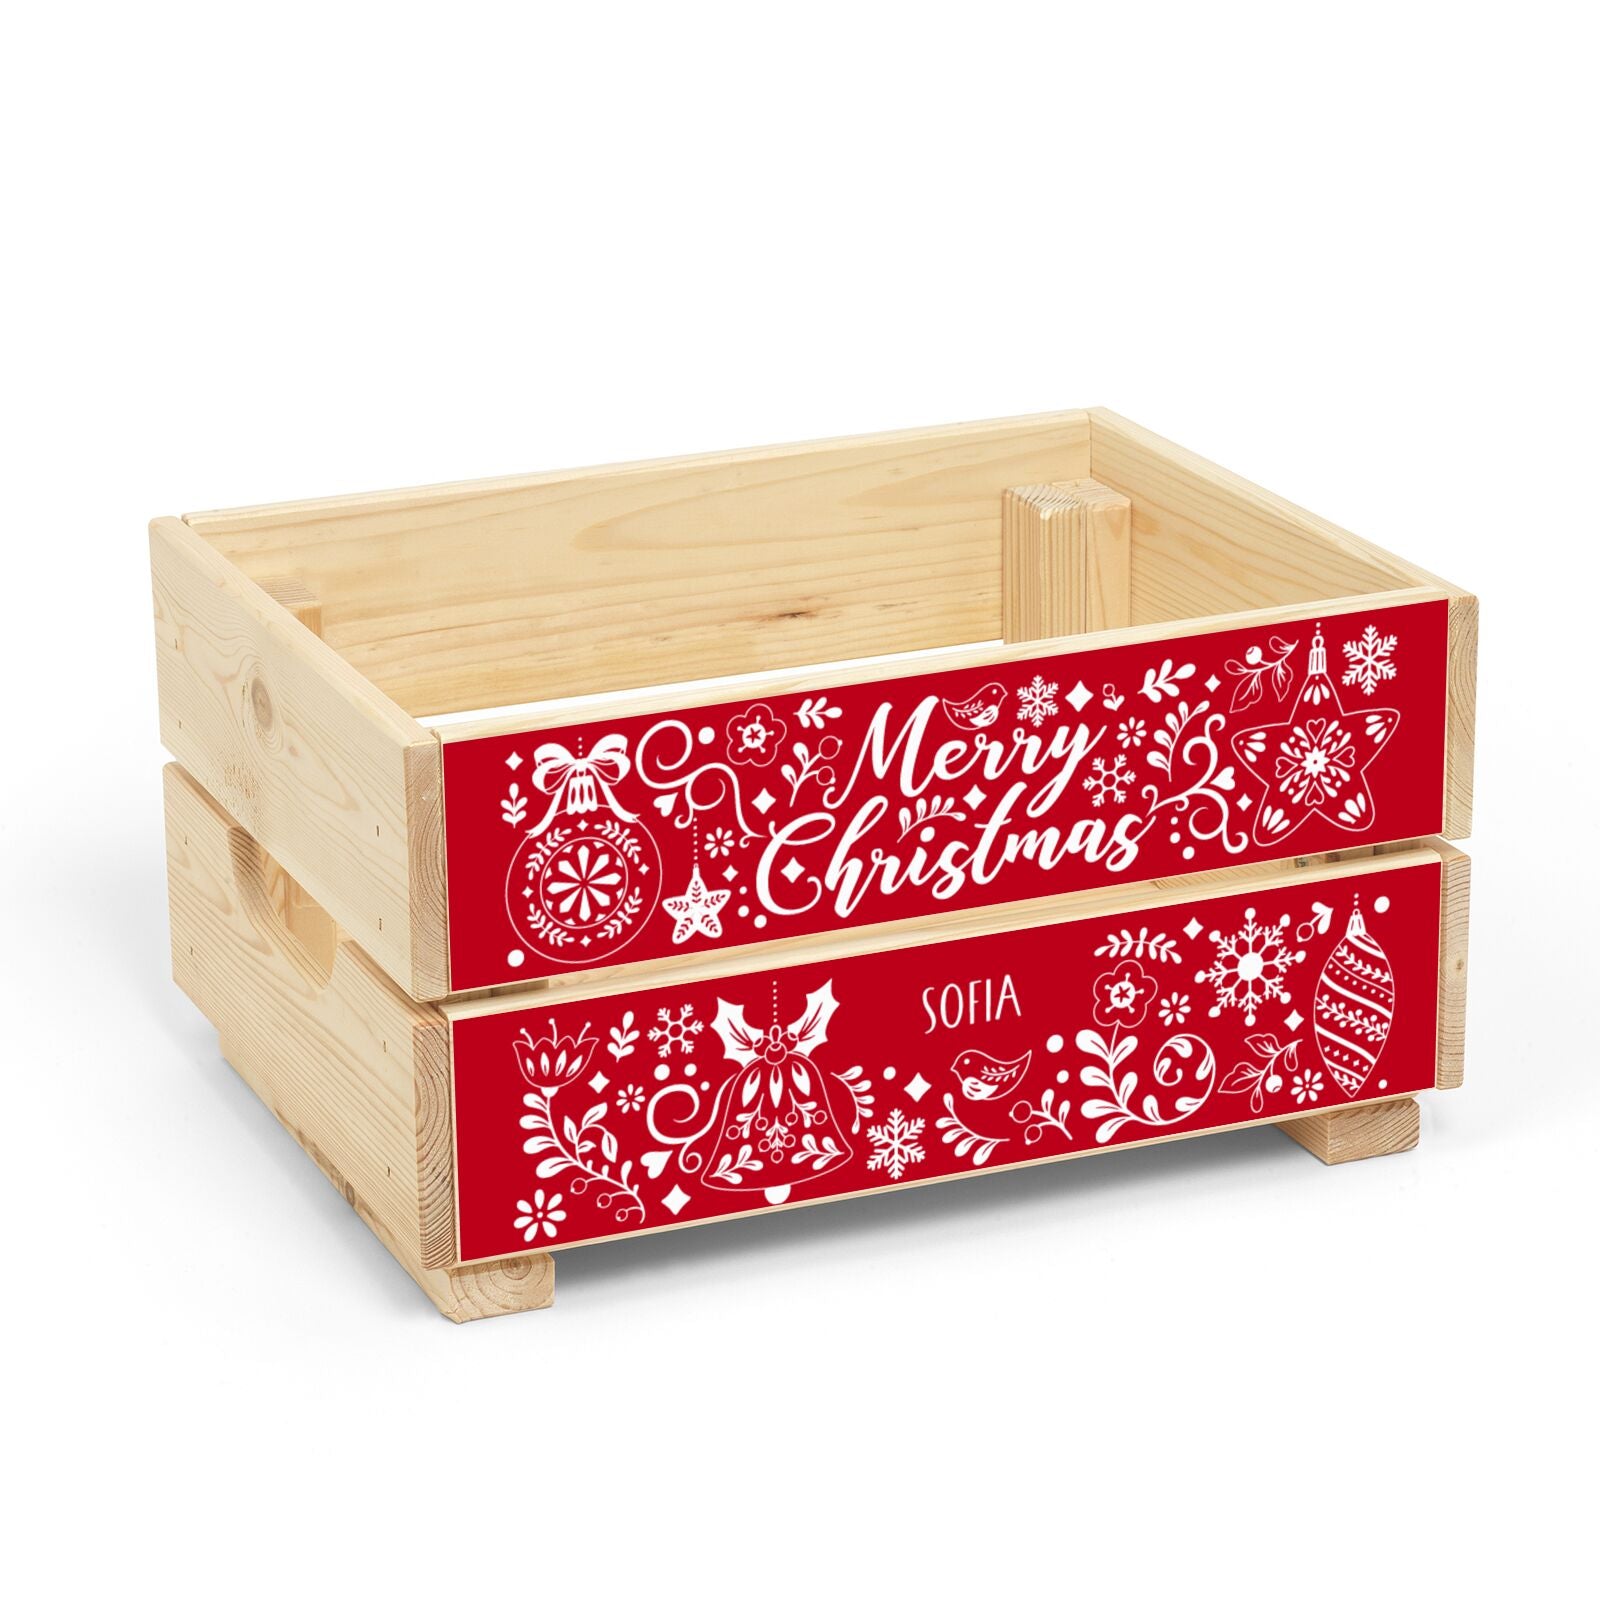 Merry Christmas Personalised Christmas Eve Crate Box Side Angle